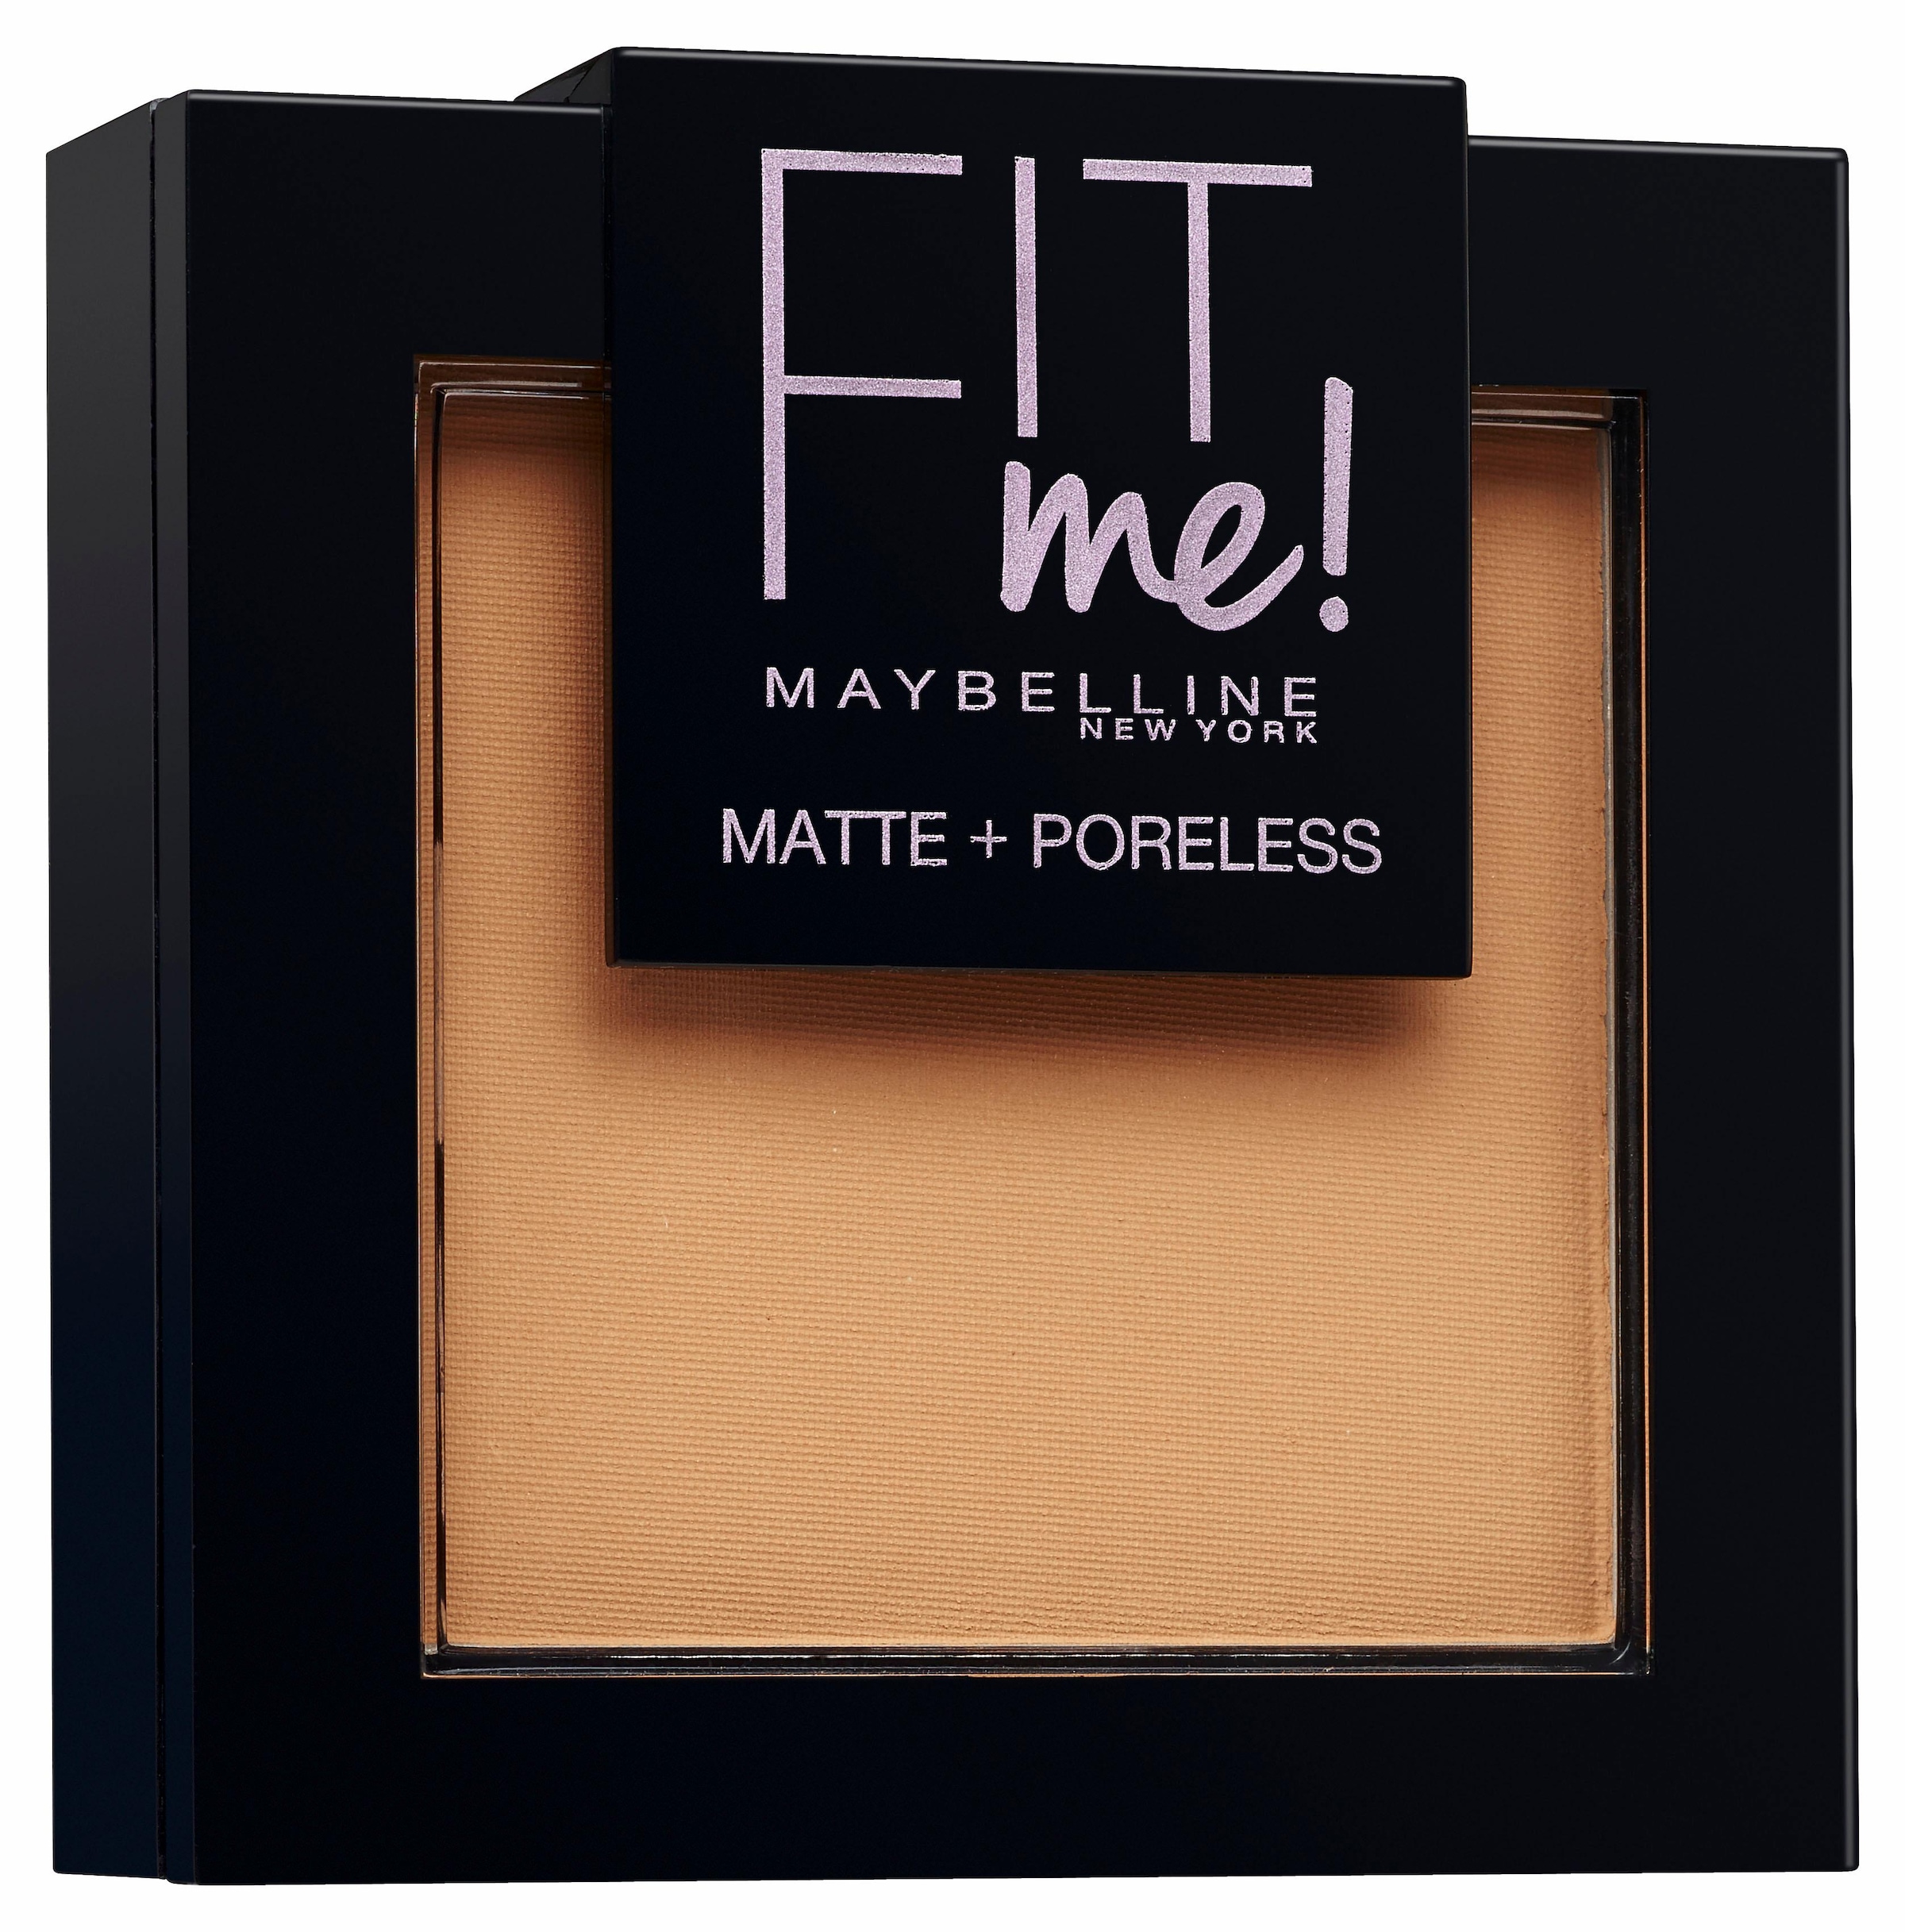 matte ME«, ♕ bei poreless Puder + »FIT MAYBELLINE NEW YORK